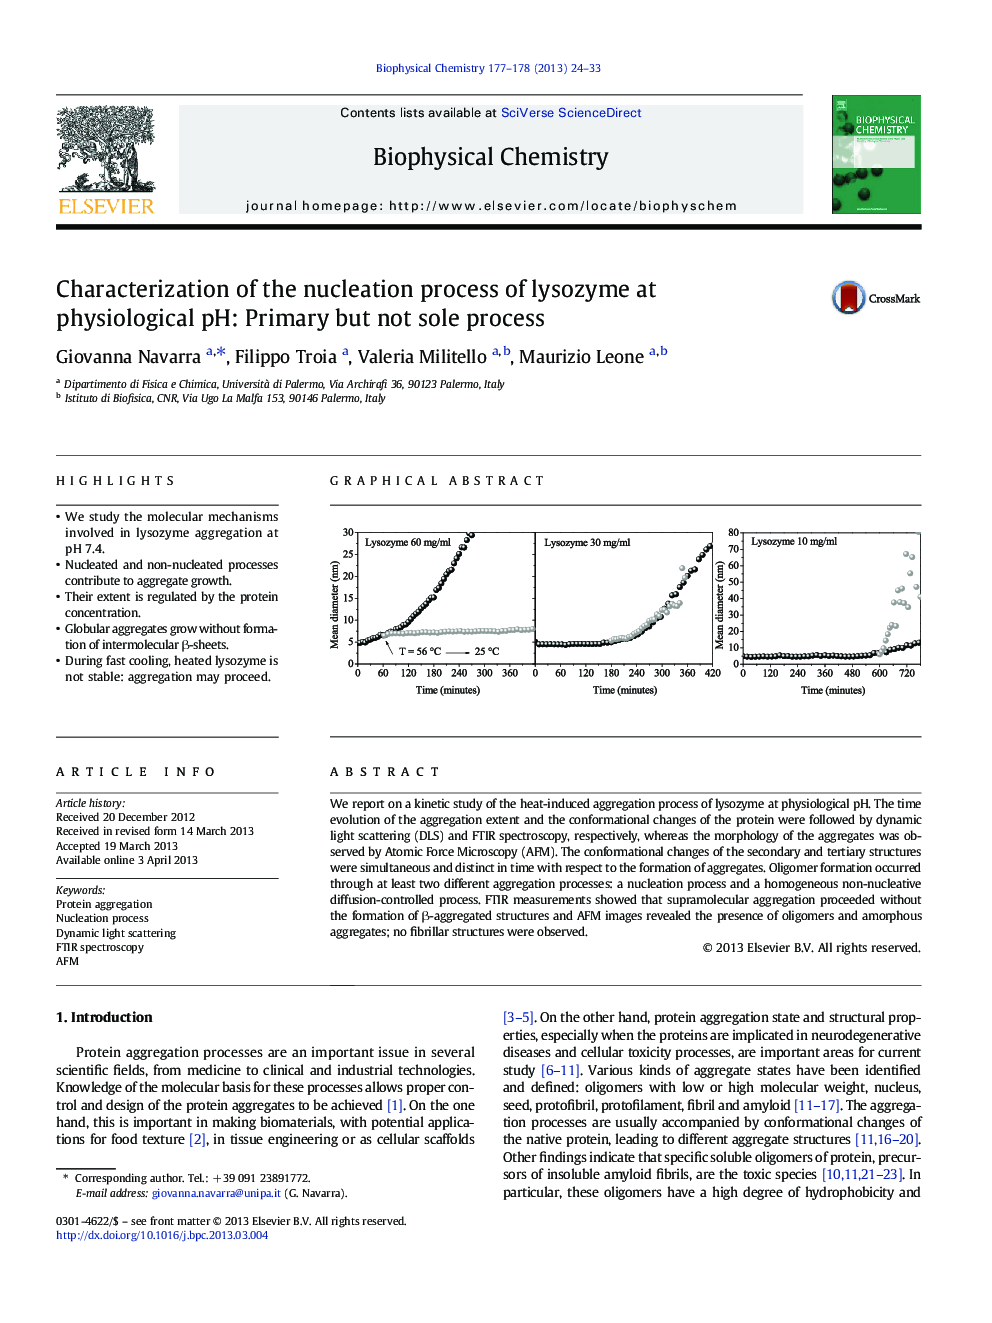 Characterization of the nucleation process of lysozyme at physiological pH: Primary but not sole process